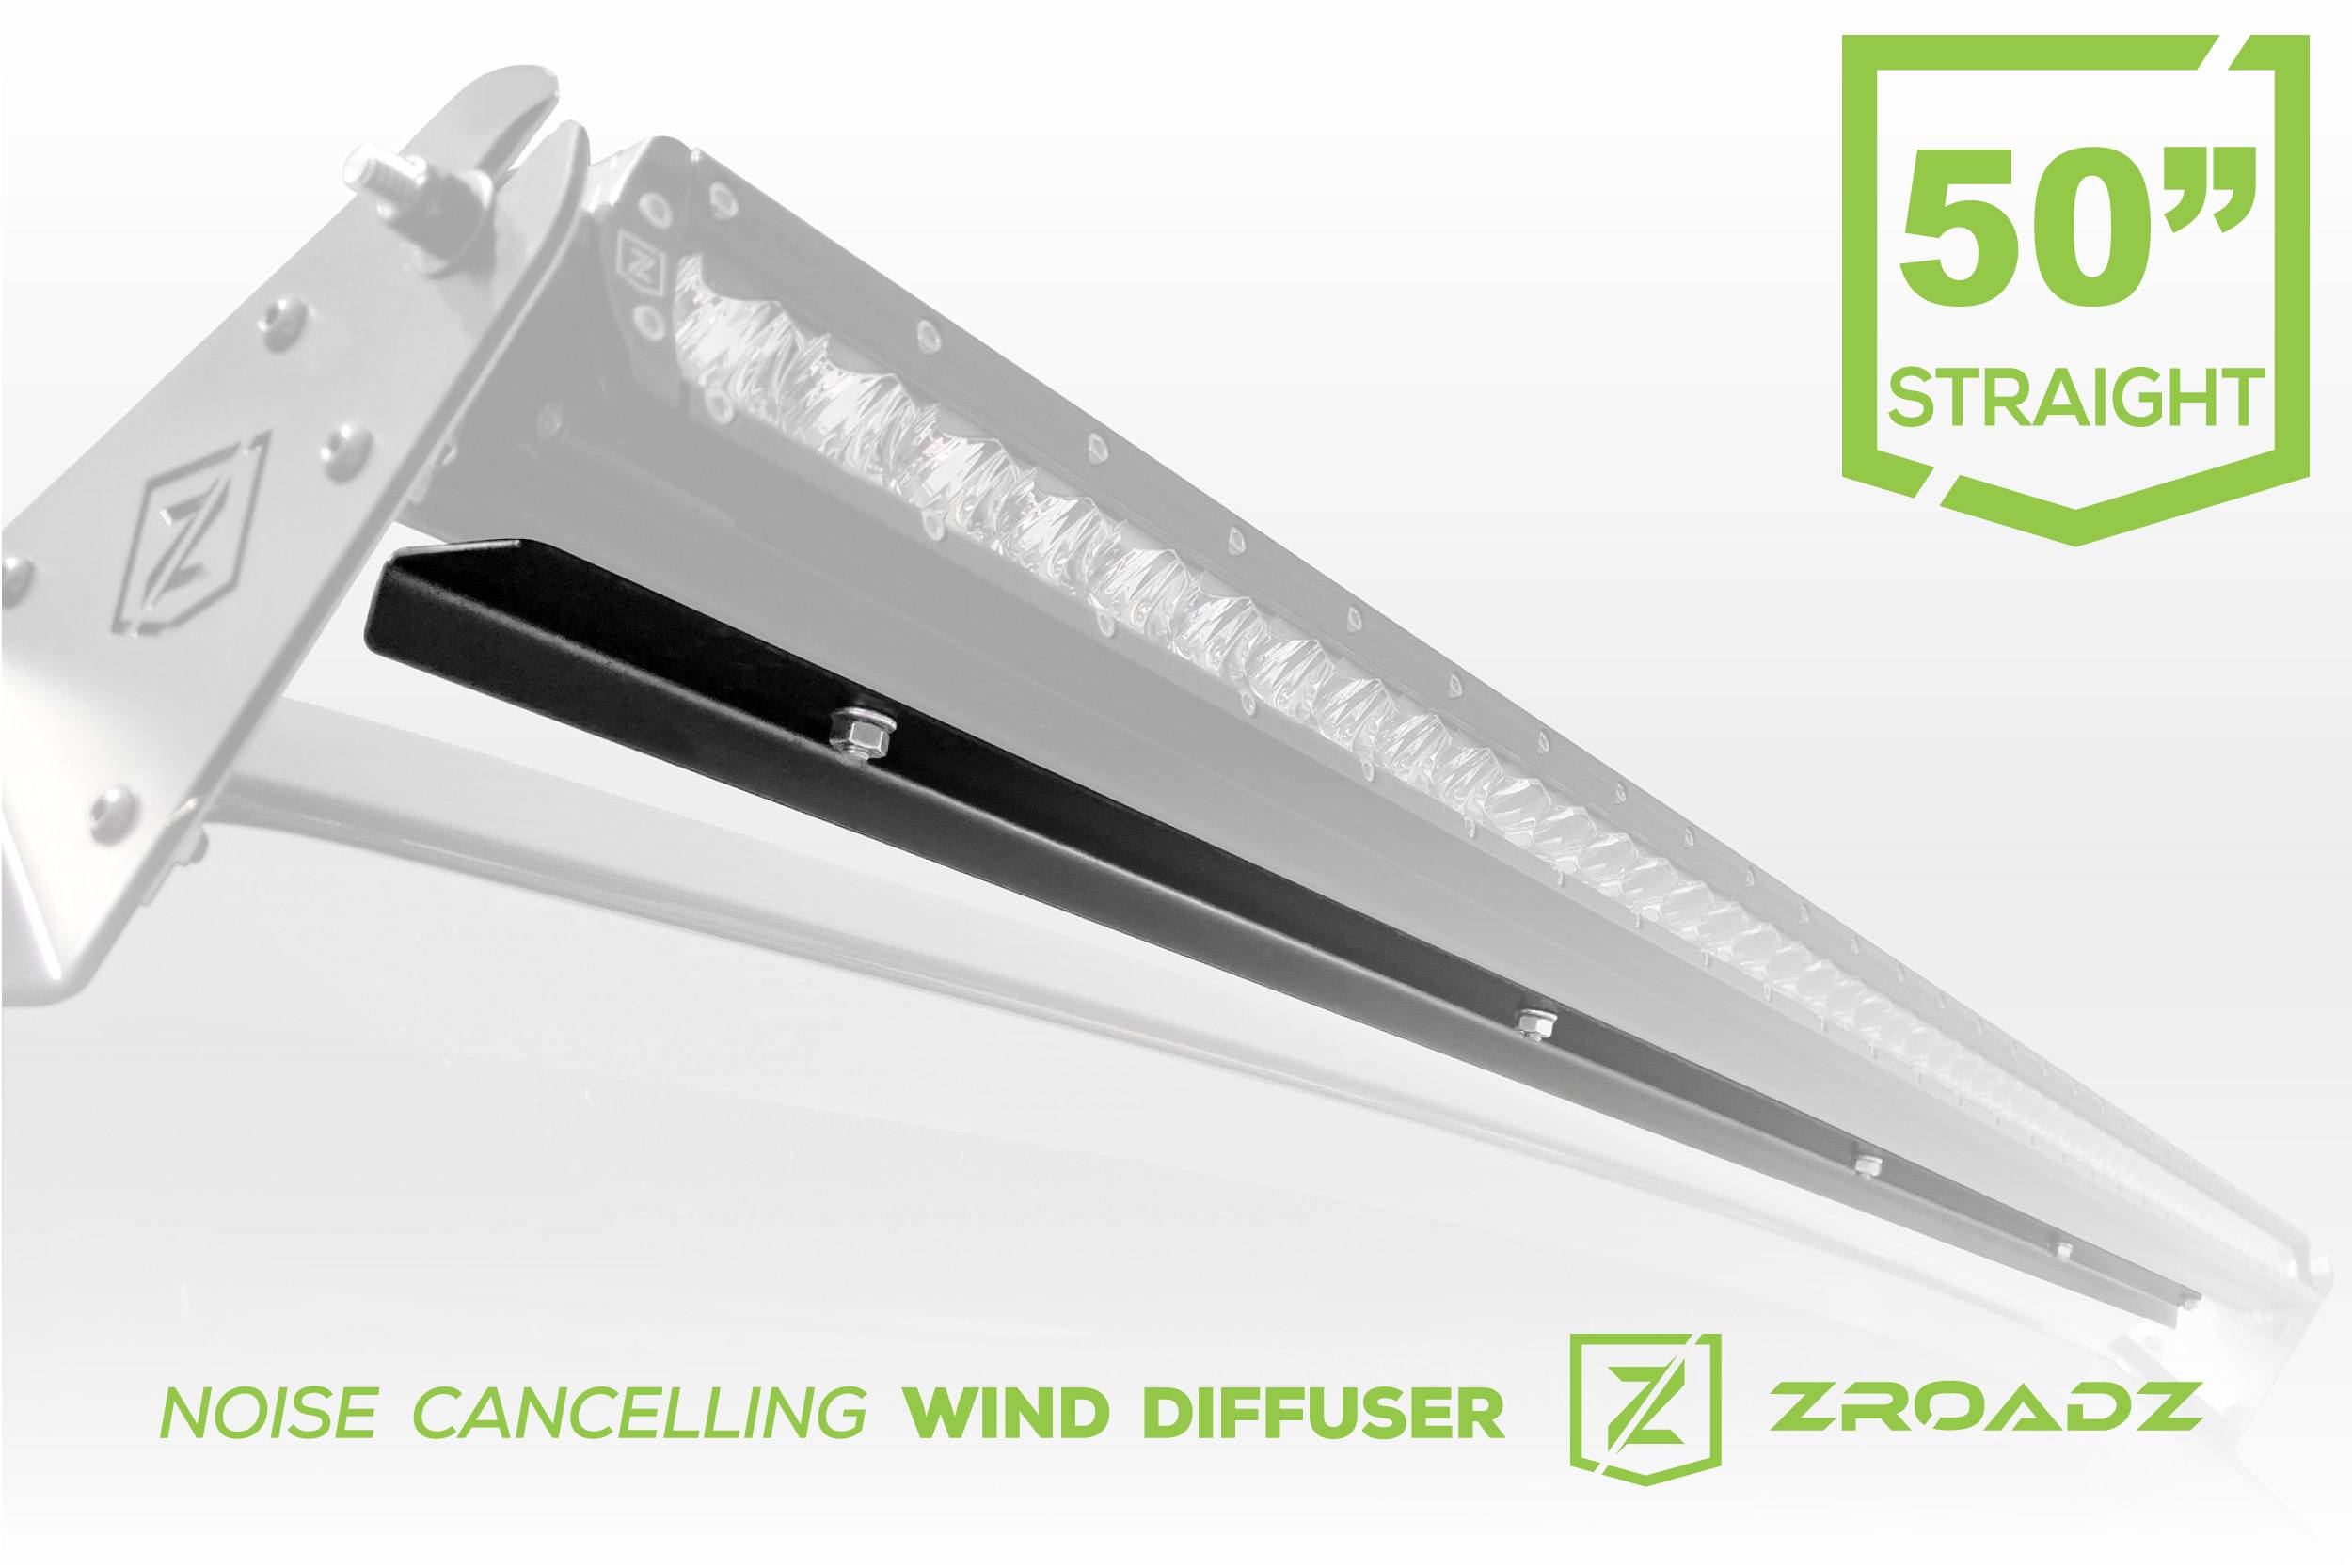 ZROADZ OFF ROAD PRODUCTS Z330051S Noise Cancelling Wind Diffuser for 50 Inch Straight Single Row LED